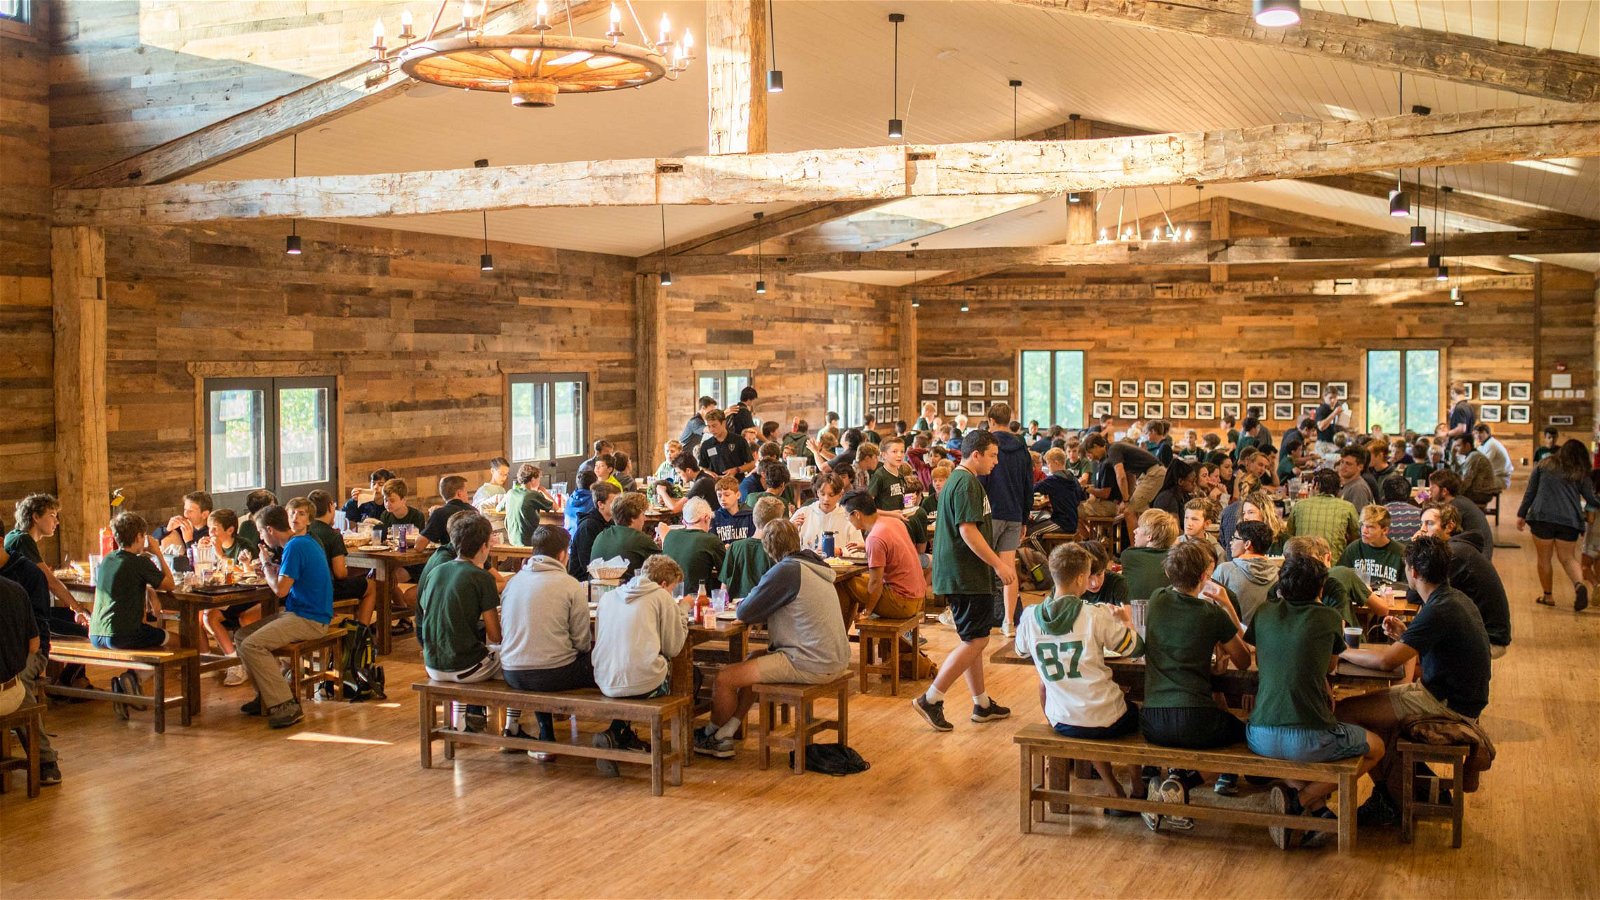 Campers in the dining hall